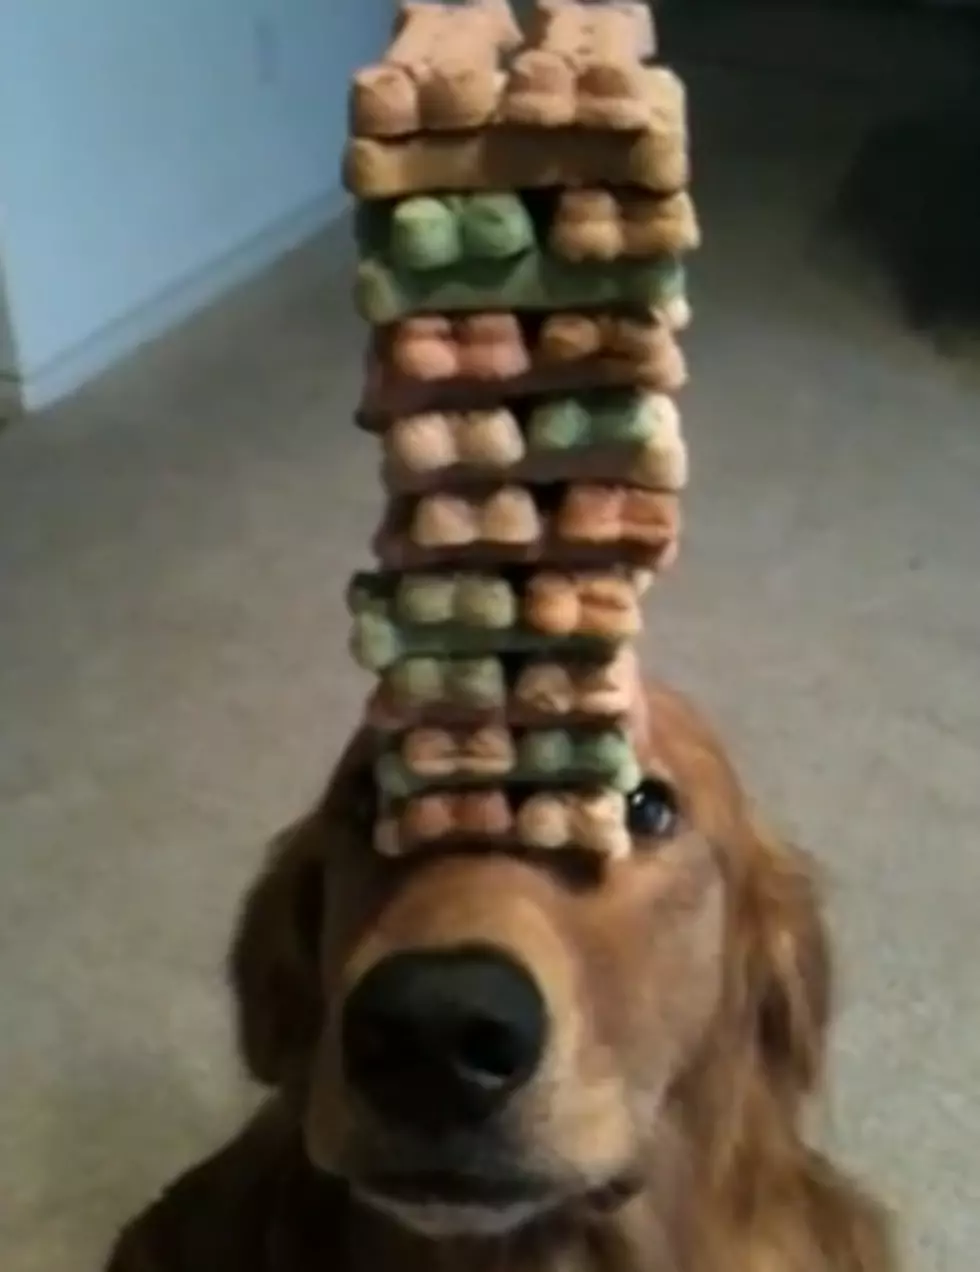 Talented Dog Shows Discipline With Amazing Balancing Act [VIDEO]